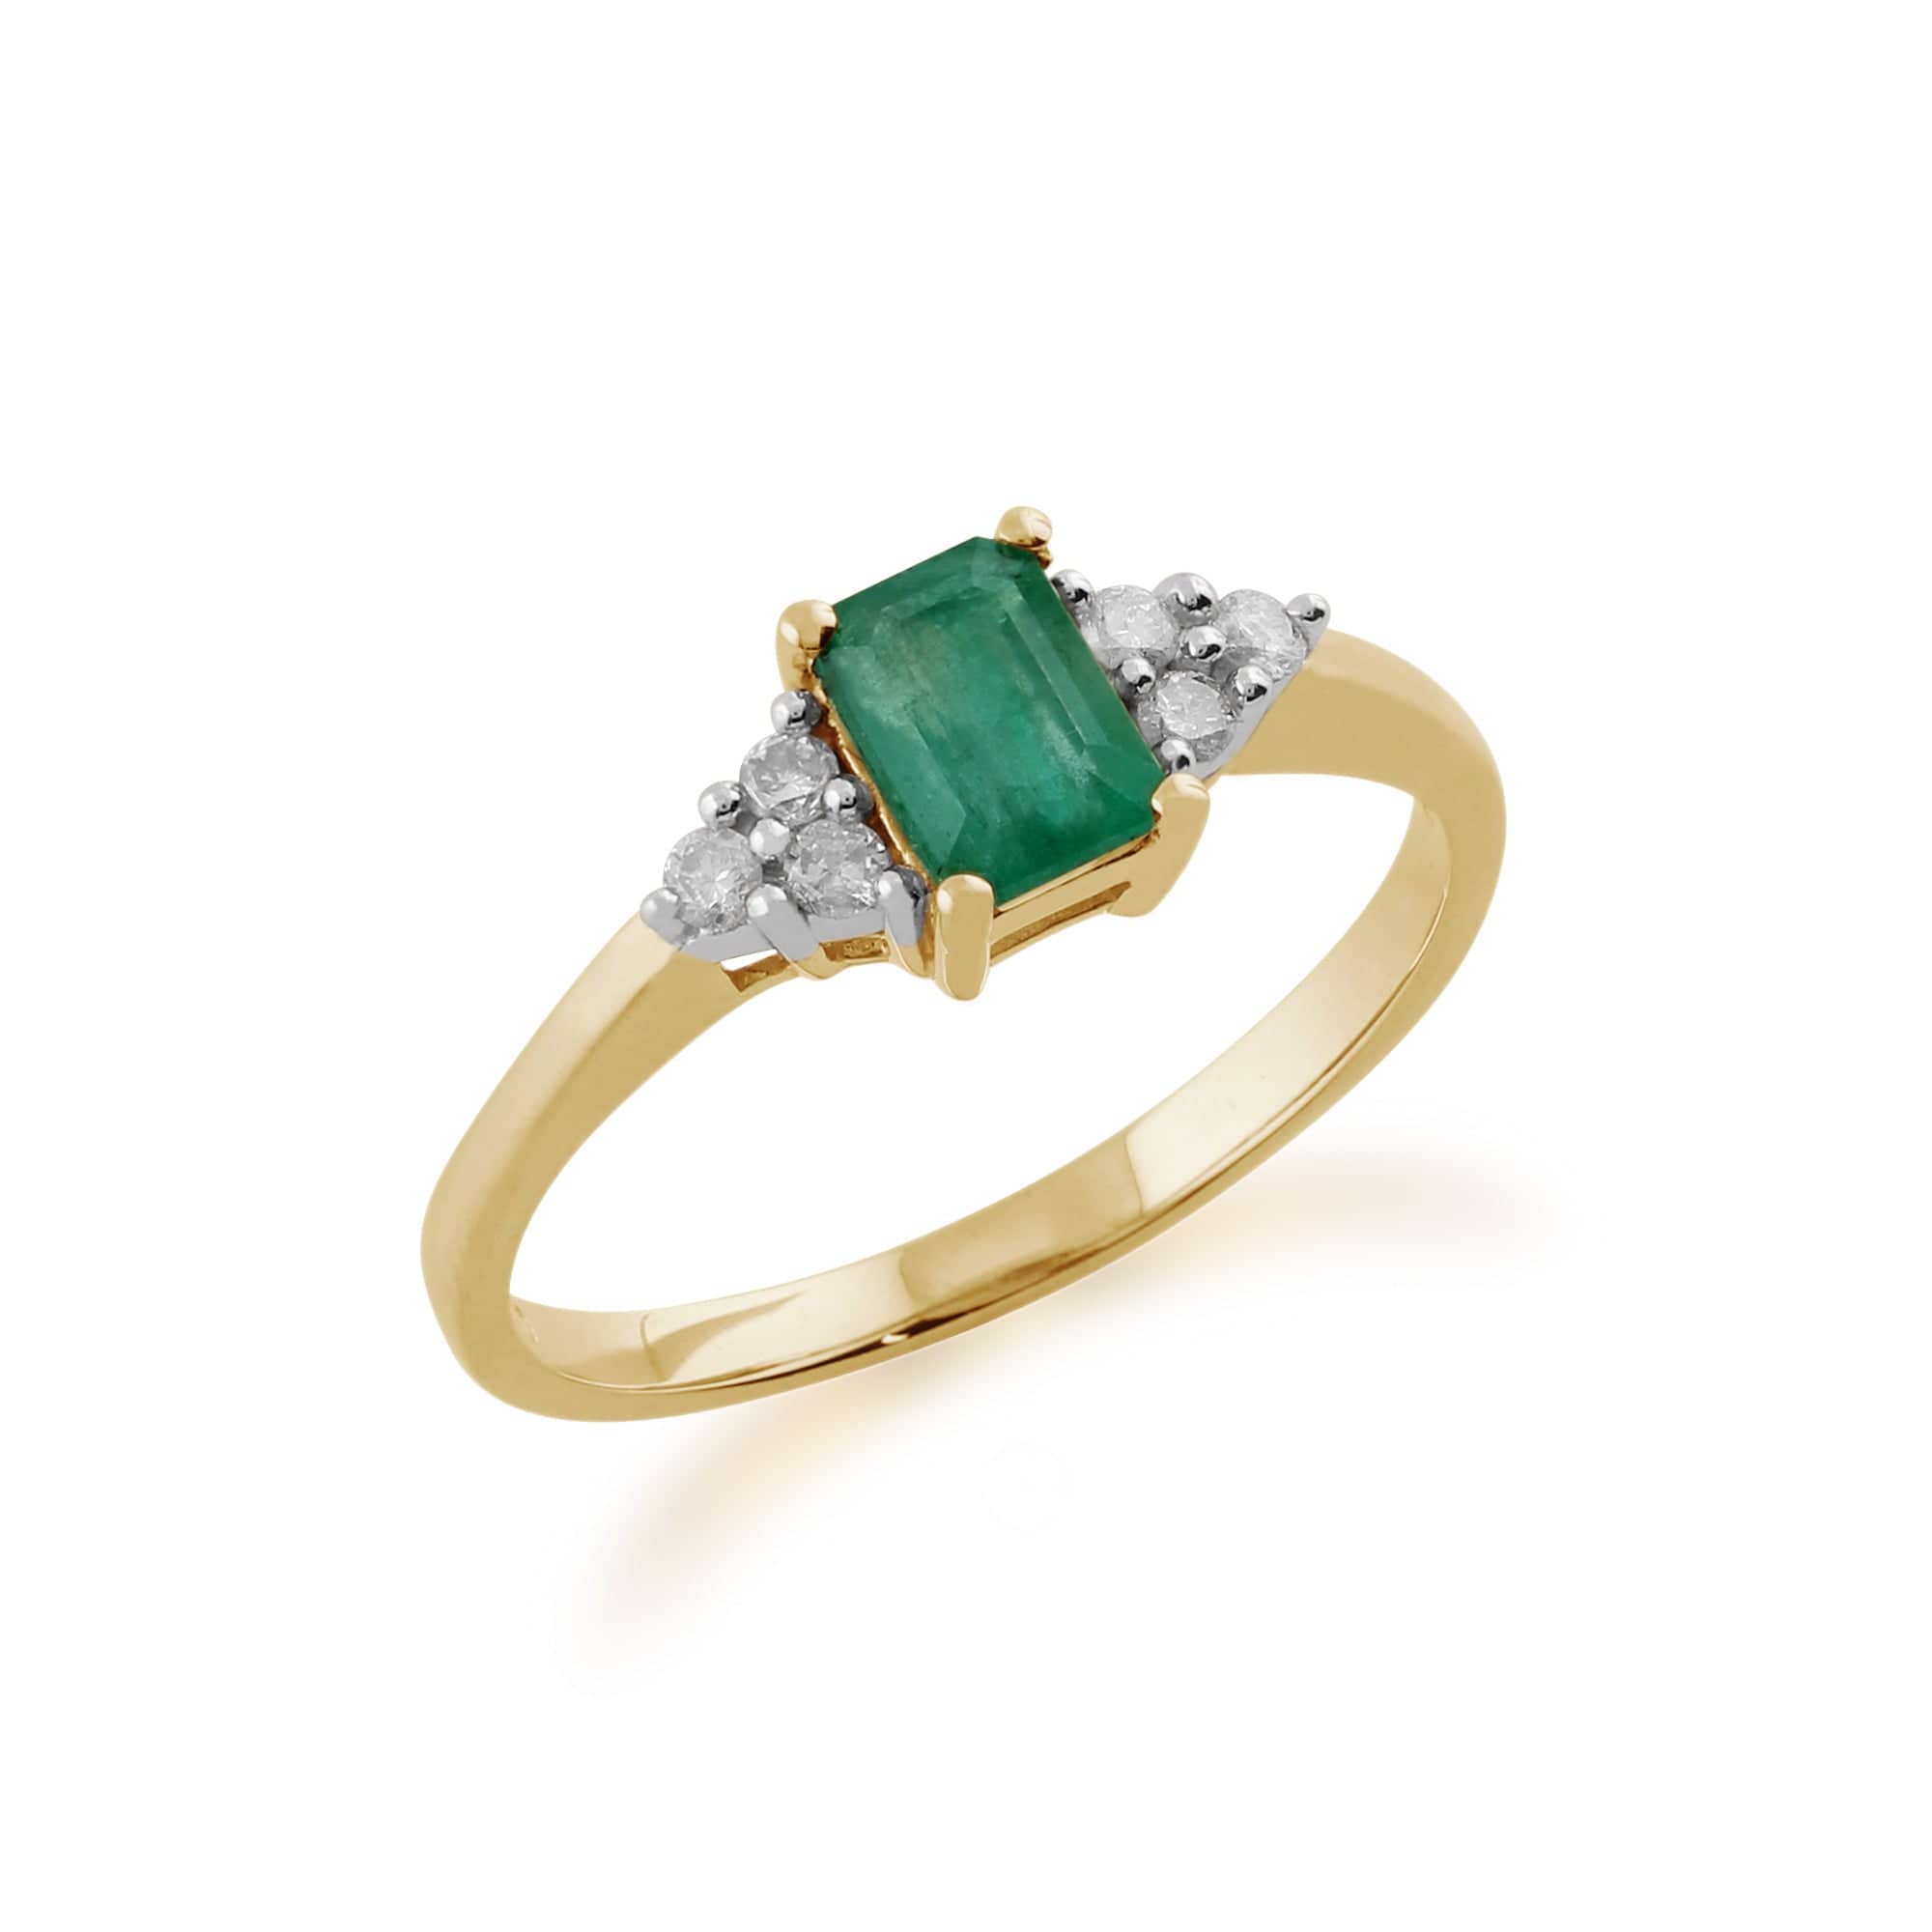 26986 Classic Baguette Emerald & Diamond Ring in 9ct Yellow Gold 3